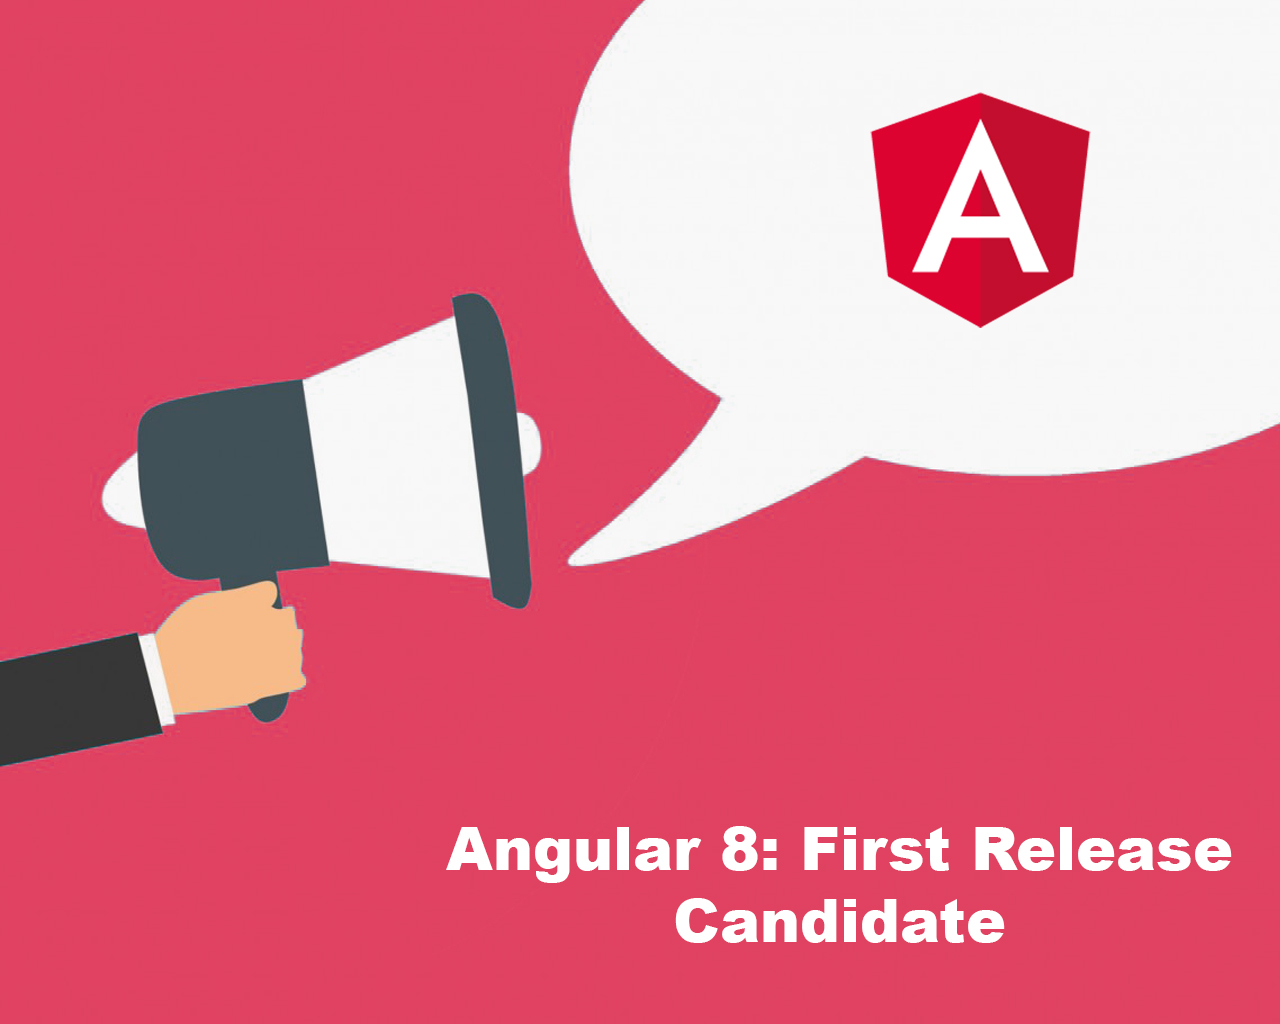 Angular 8: First Release Candidate released